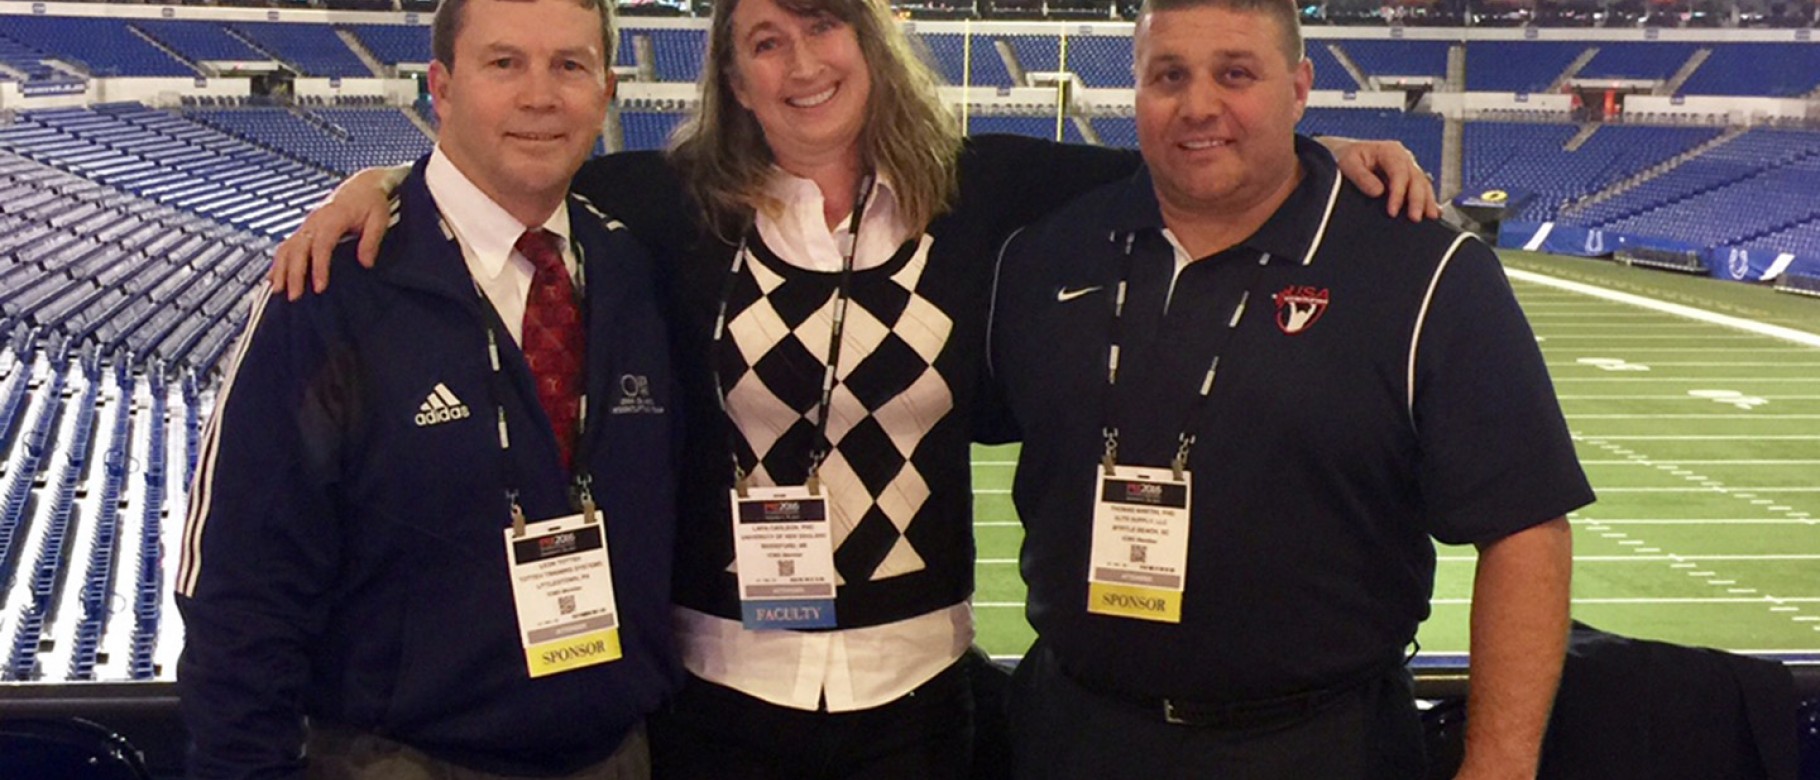 Lara Carlson at Lucas Oil Stadium with Olympic lifting coach Leo Totten and is his former athlete, Tom Martin